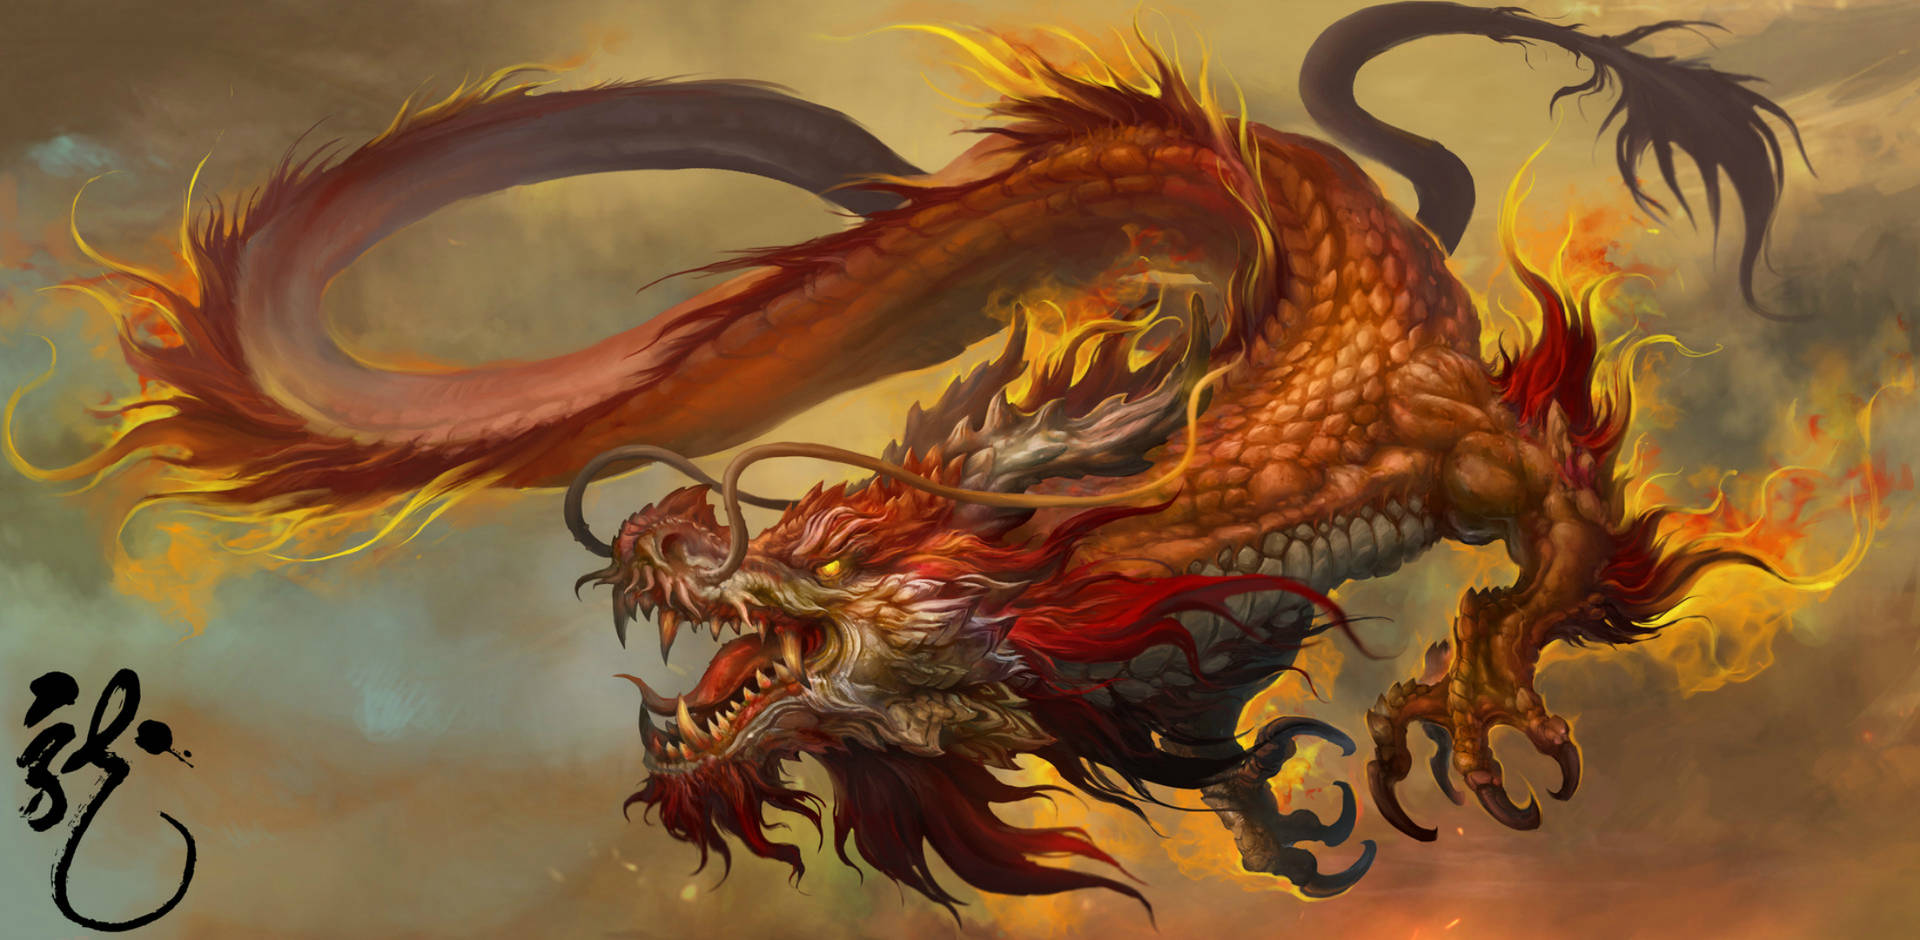 A Flying Fiery Chinese Dragon Wallpaper